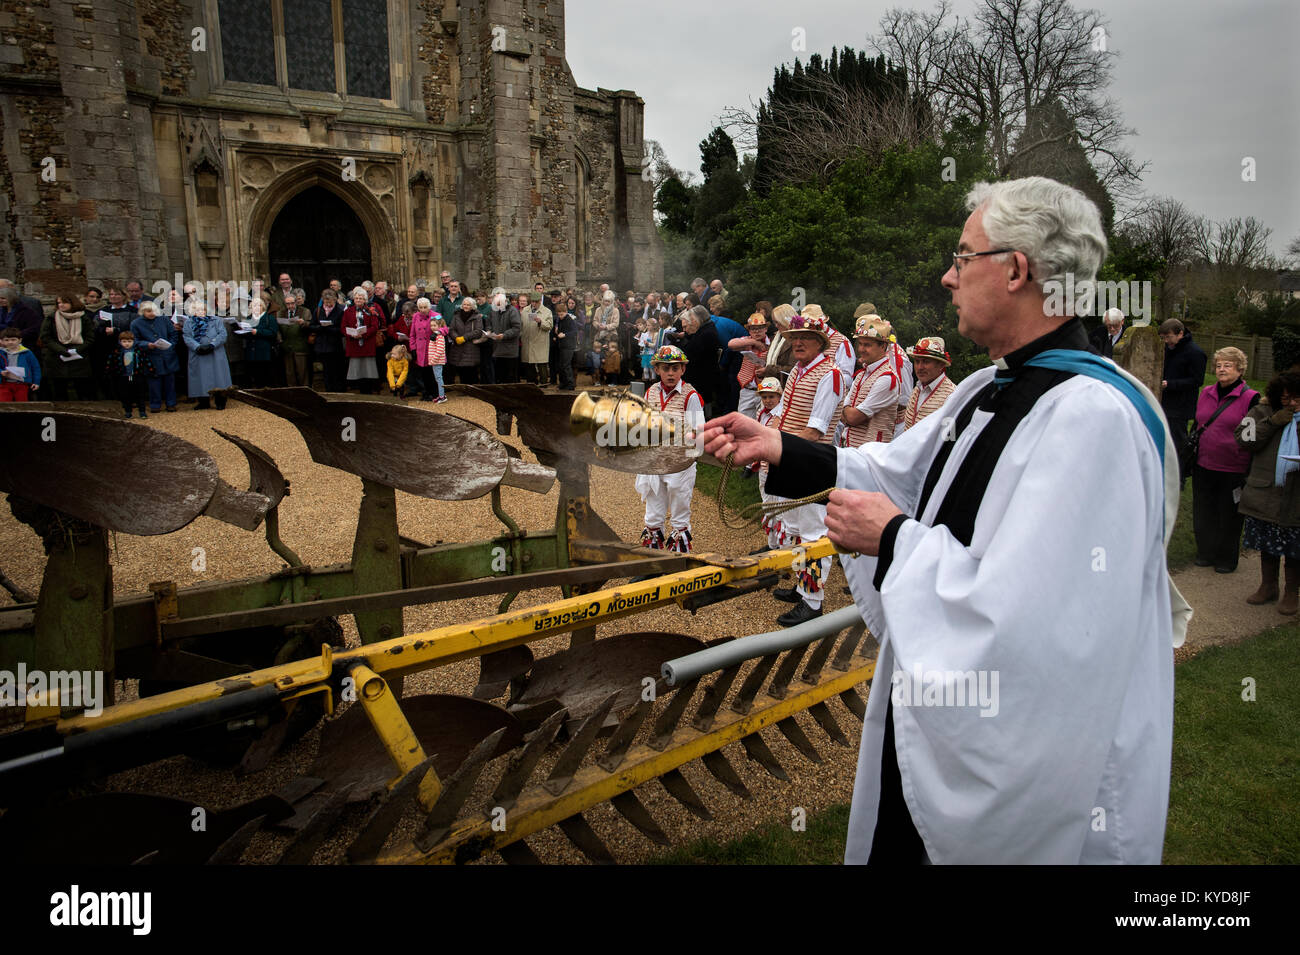 Plough Sunday, Thaxted Essex UK. 14 January 2018. Archdeacon Robin King from Stansted with a censer blesses the plough in the churchyard of Thaxted parrish church as the Thaxted Morris Men perform a ploughing dance.Plough Sunday is a traditional English celebration of the beginning of the agricultural year that has seen some revival over recent years. Plough Sunday celebrations usually involve bringing a ploughshare into a church with prayers for the blessing of the land. Accordingly, work in the fields did not begin until Plough Monday Credit: BRIAN HARRIS/Alamy Live News Stock Photo